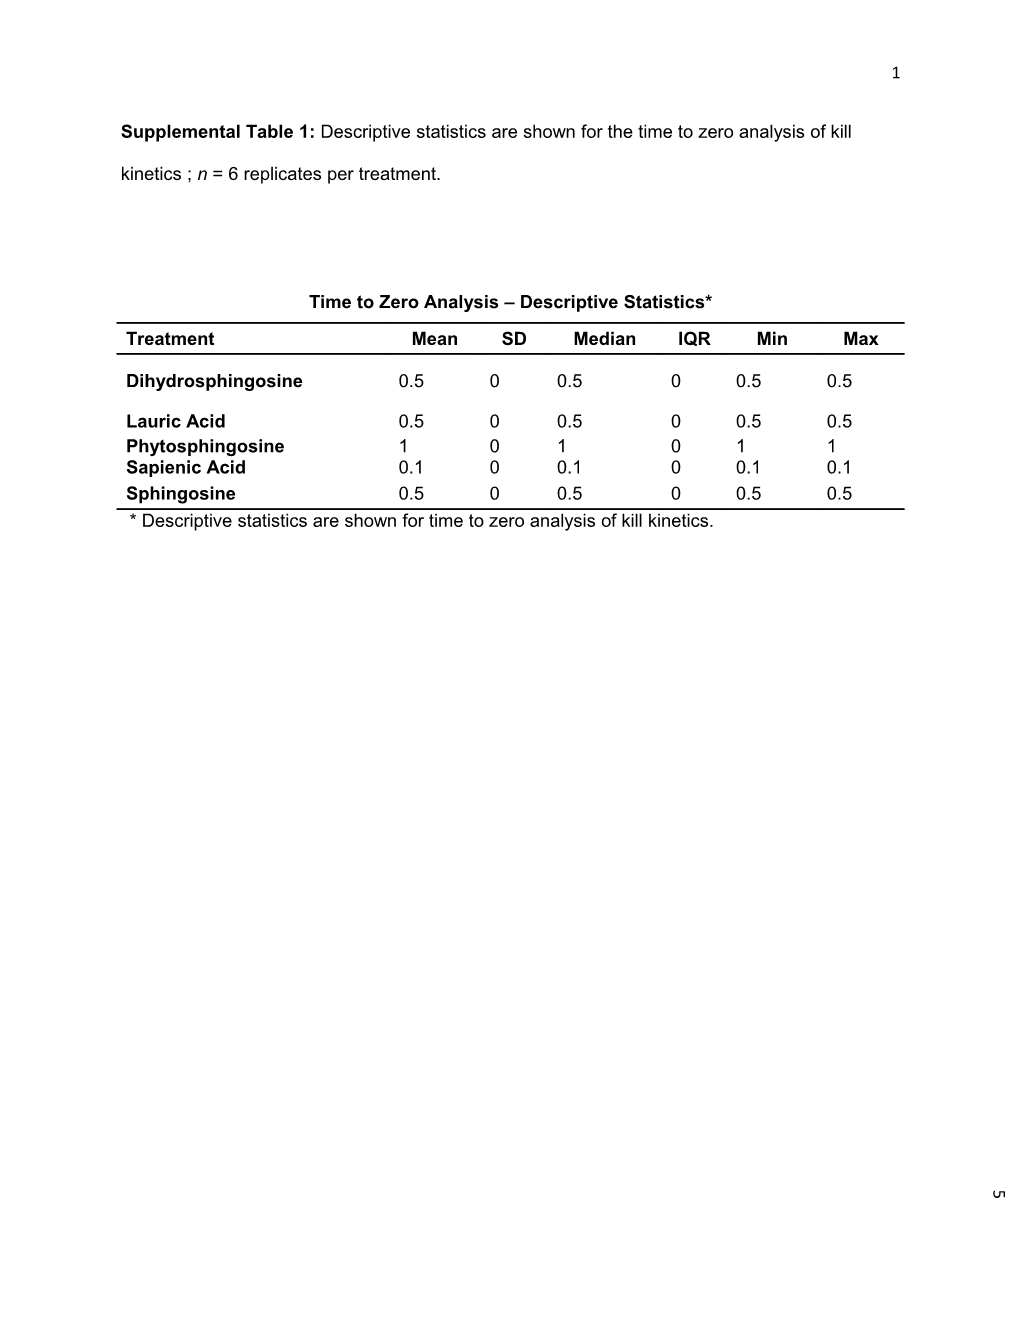 Supplemental Table 1: Descriptive Statistics Are Shown for the Time to Zero Analysis Of